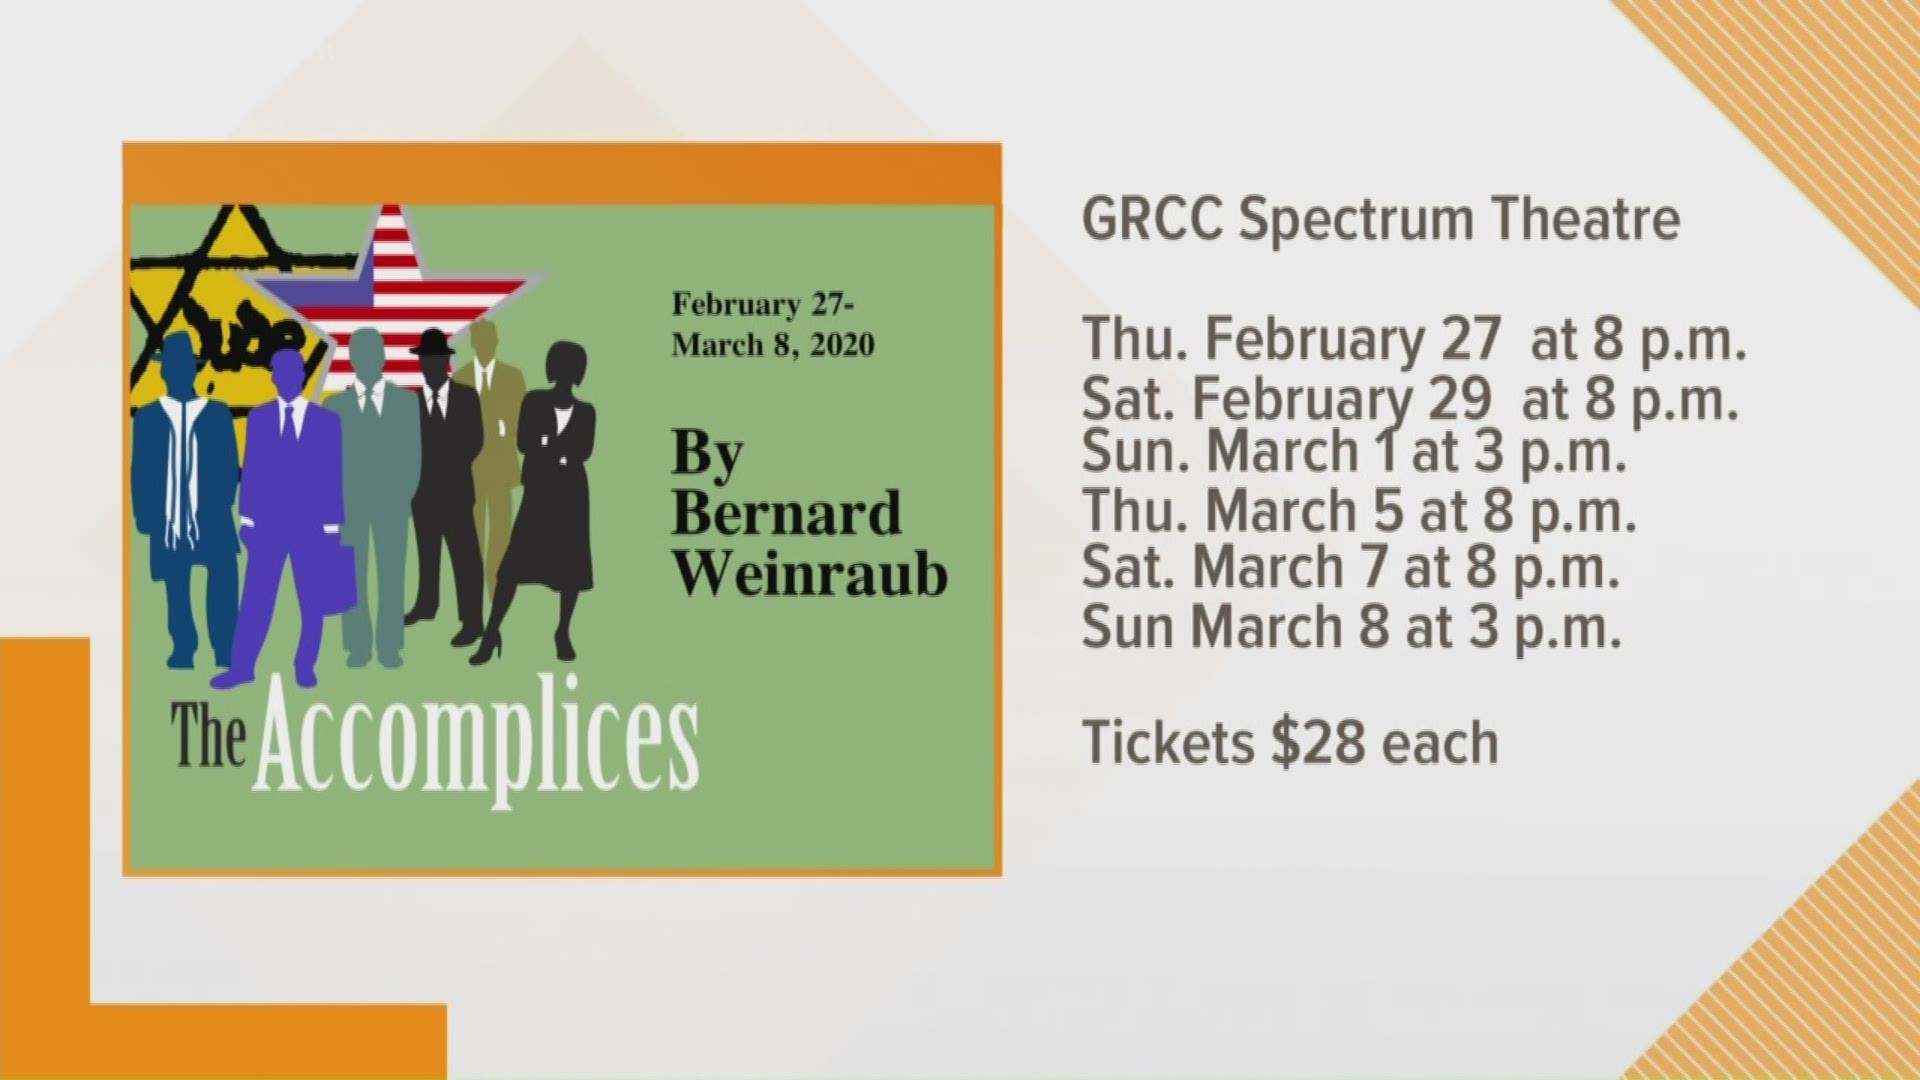 You can catch "The Accomplices" in Grand Rapids starting Thursday, February 27.